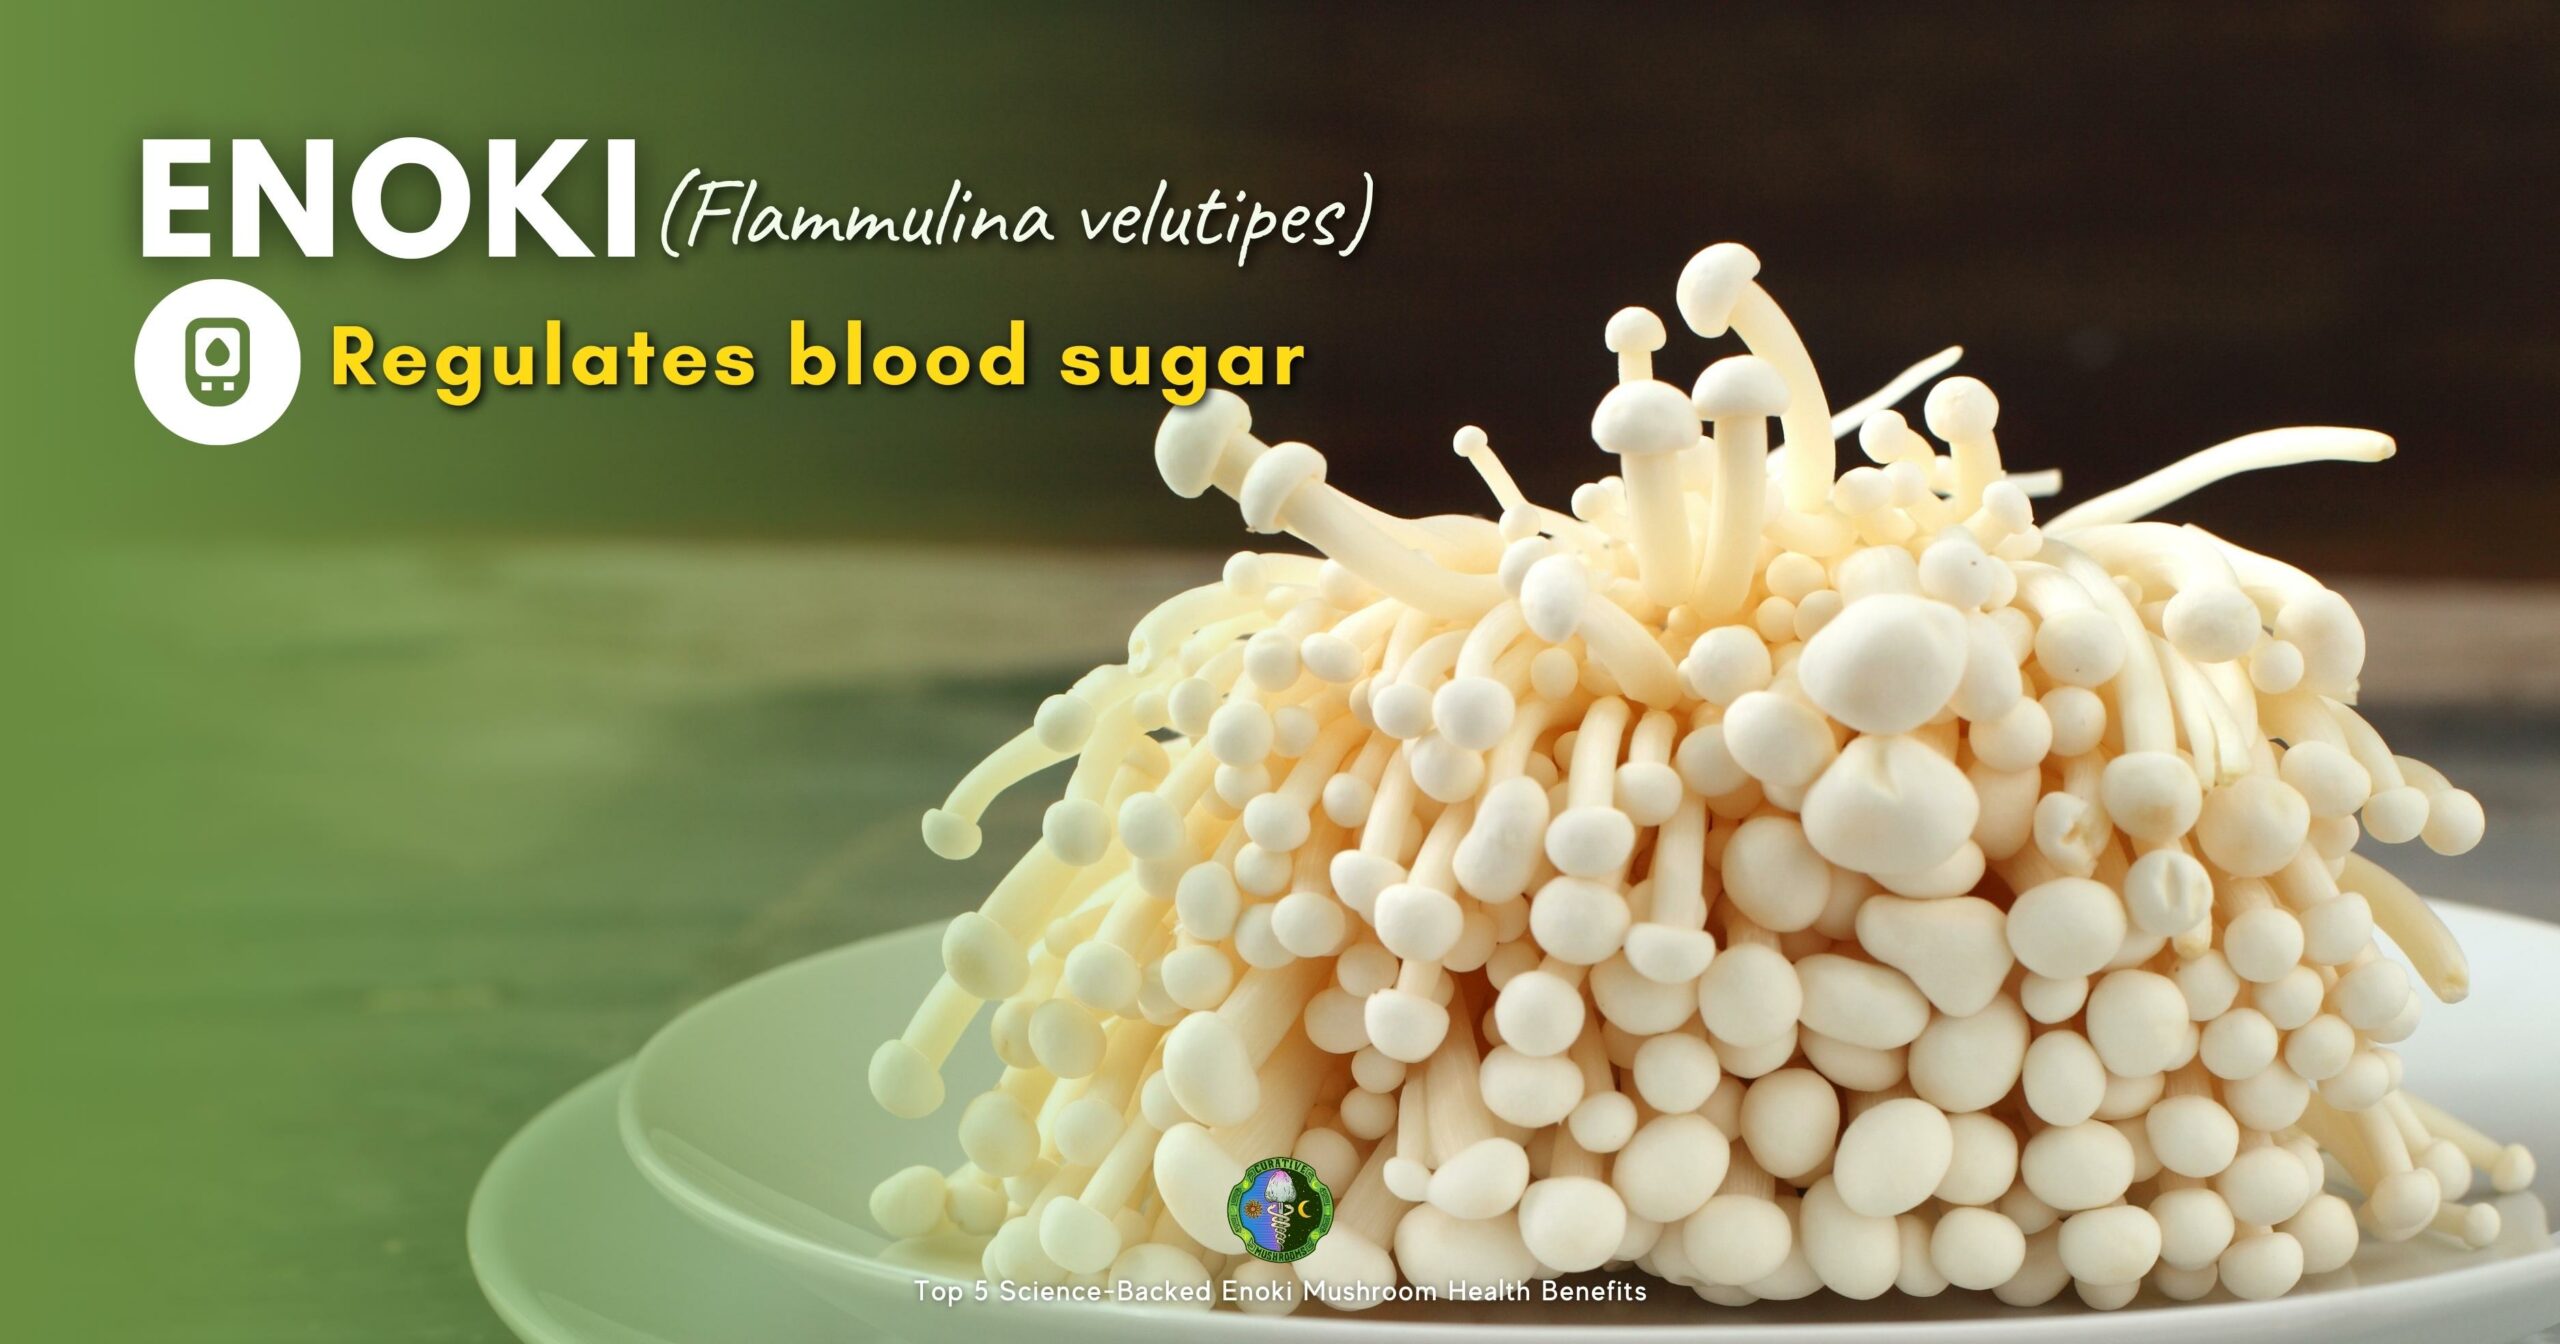 Enoki mushroom benefits health by Regulating blood sugar - high fiber and beta-glucans slowing down digestion and promoting a gradual release of glucose